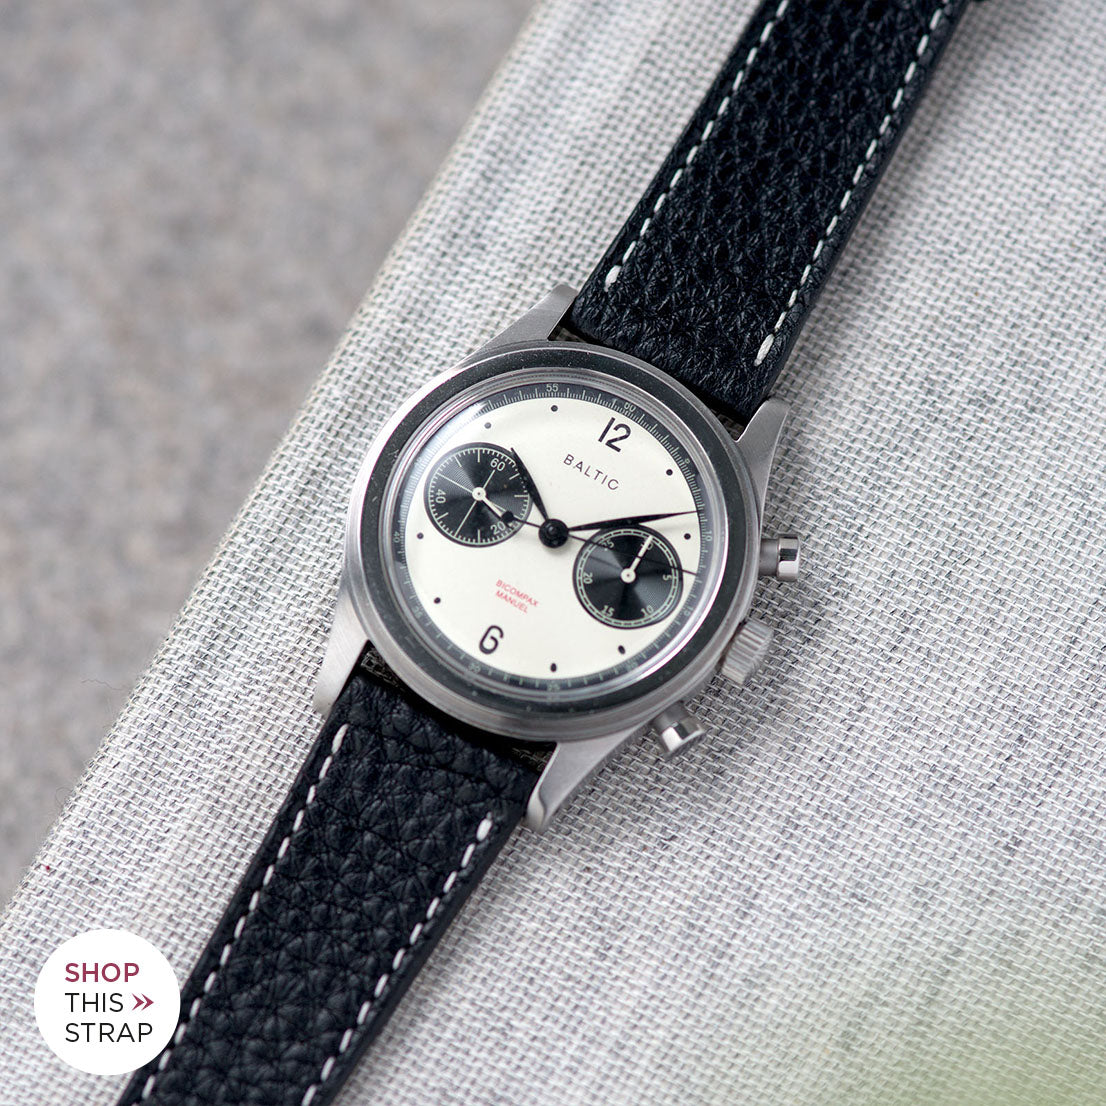 Bulang and Sons_Strap Guide_The Baltic-Chronograph-Panda-Limited-Edition_Rich Black Creme Stitch Leather Watch Strap